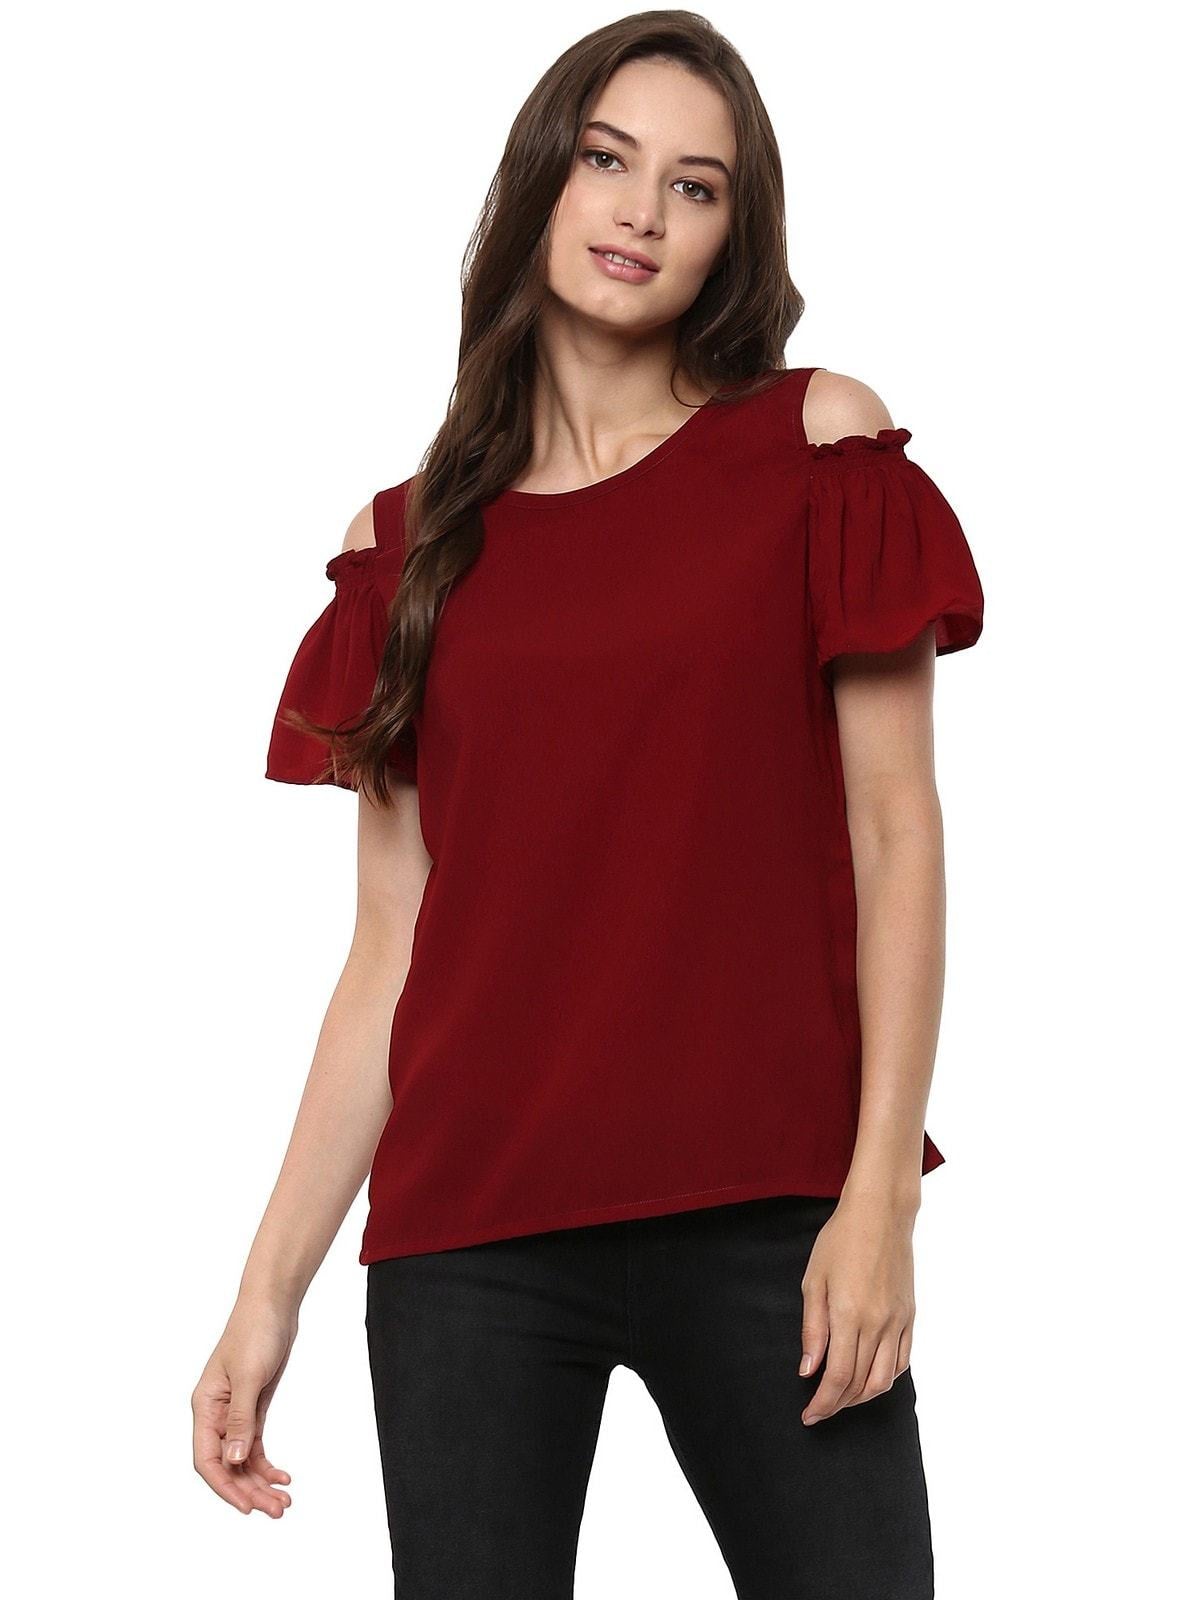 Women's Solid Top With Smoking Cold-Shoulder - Pannkh